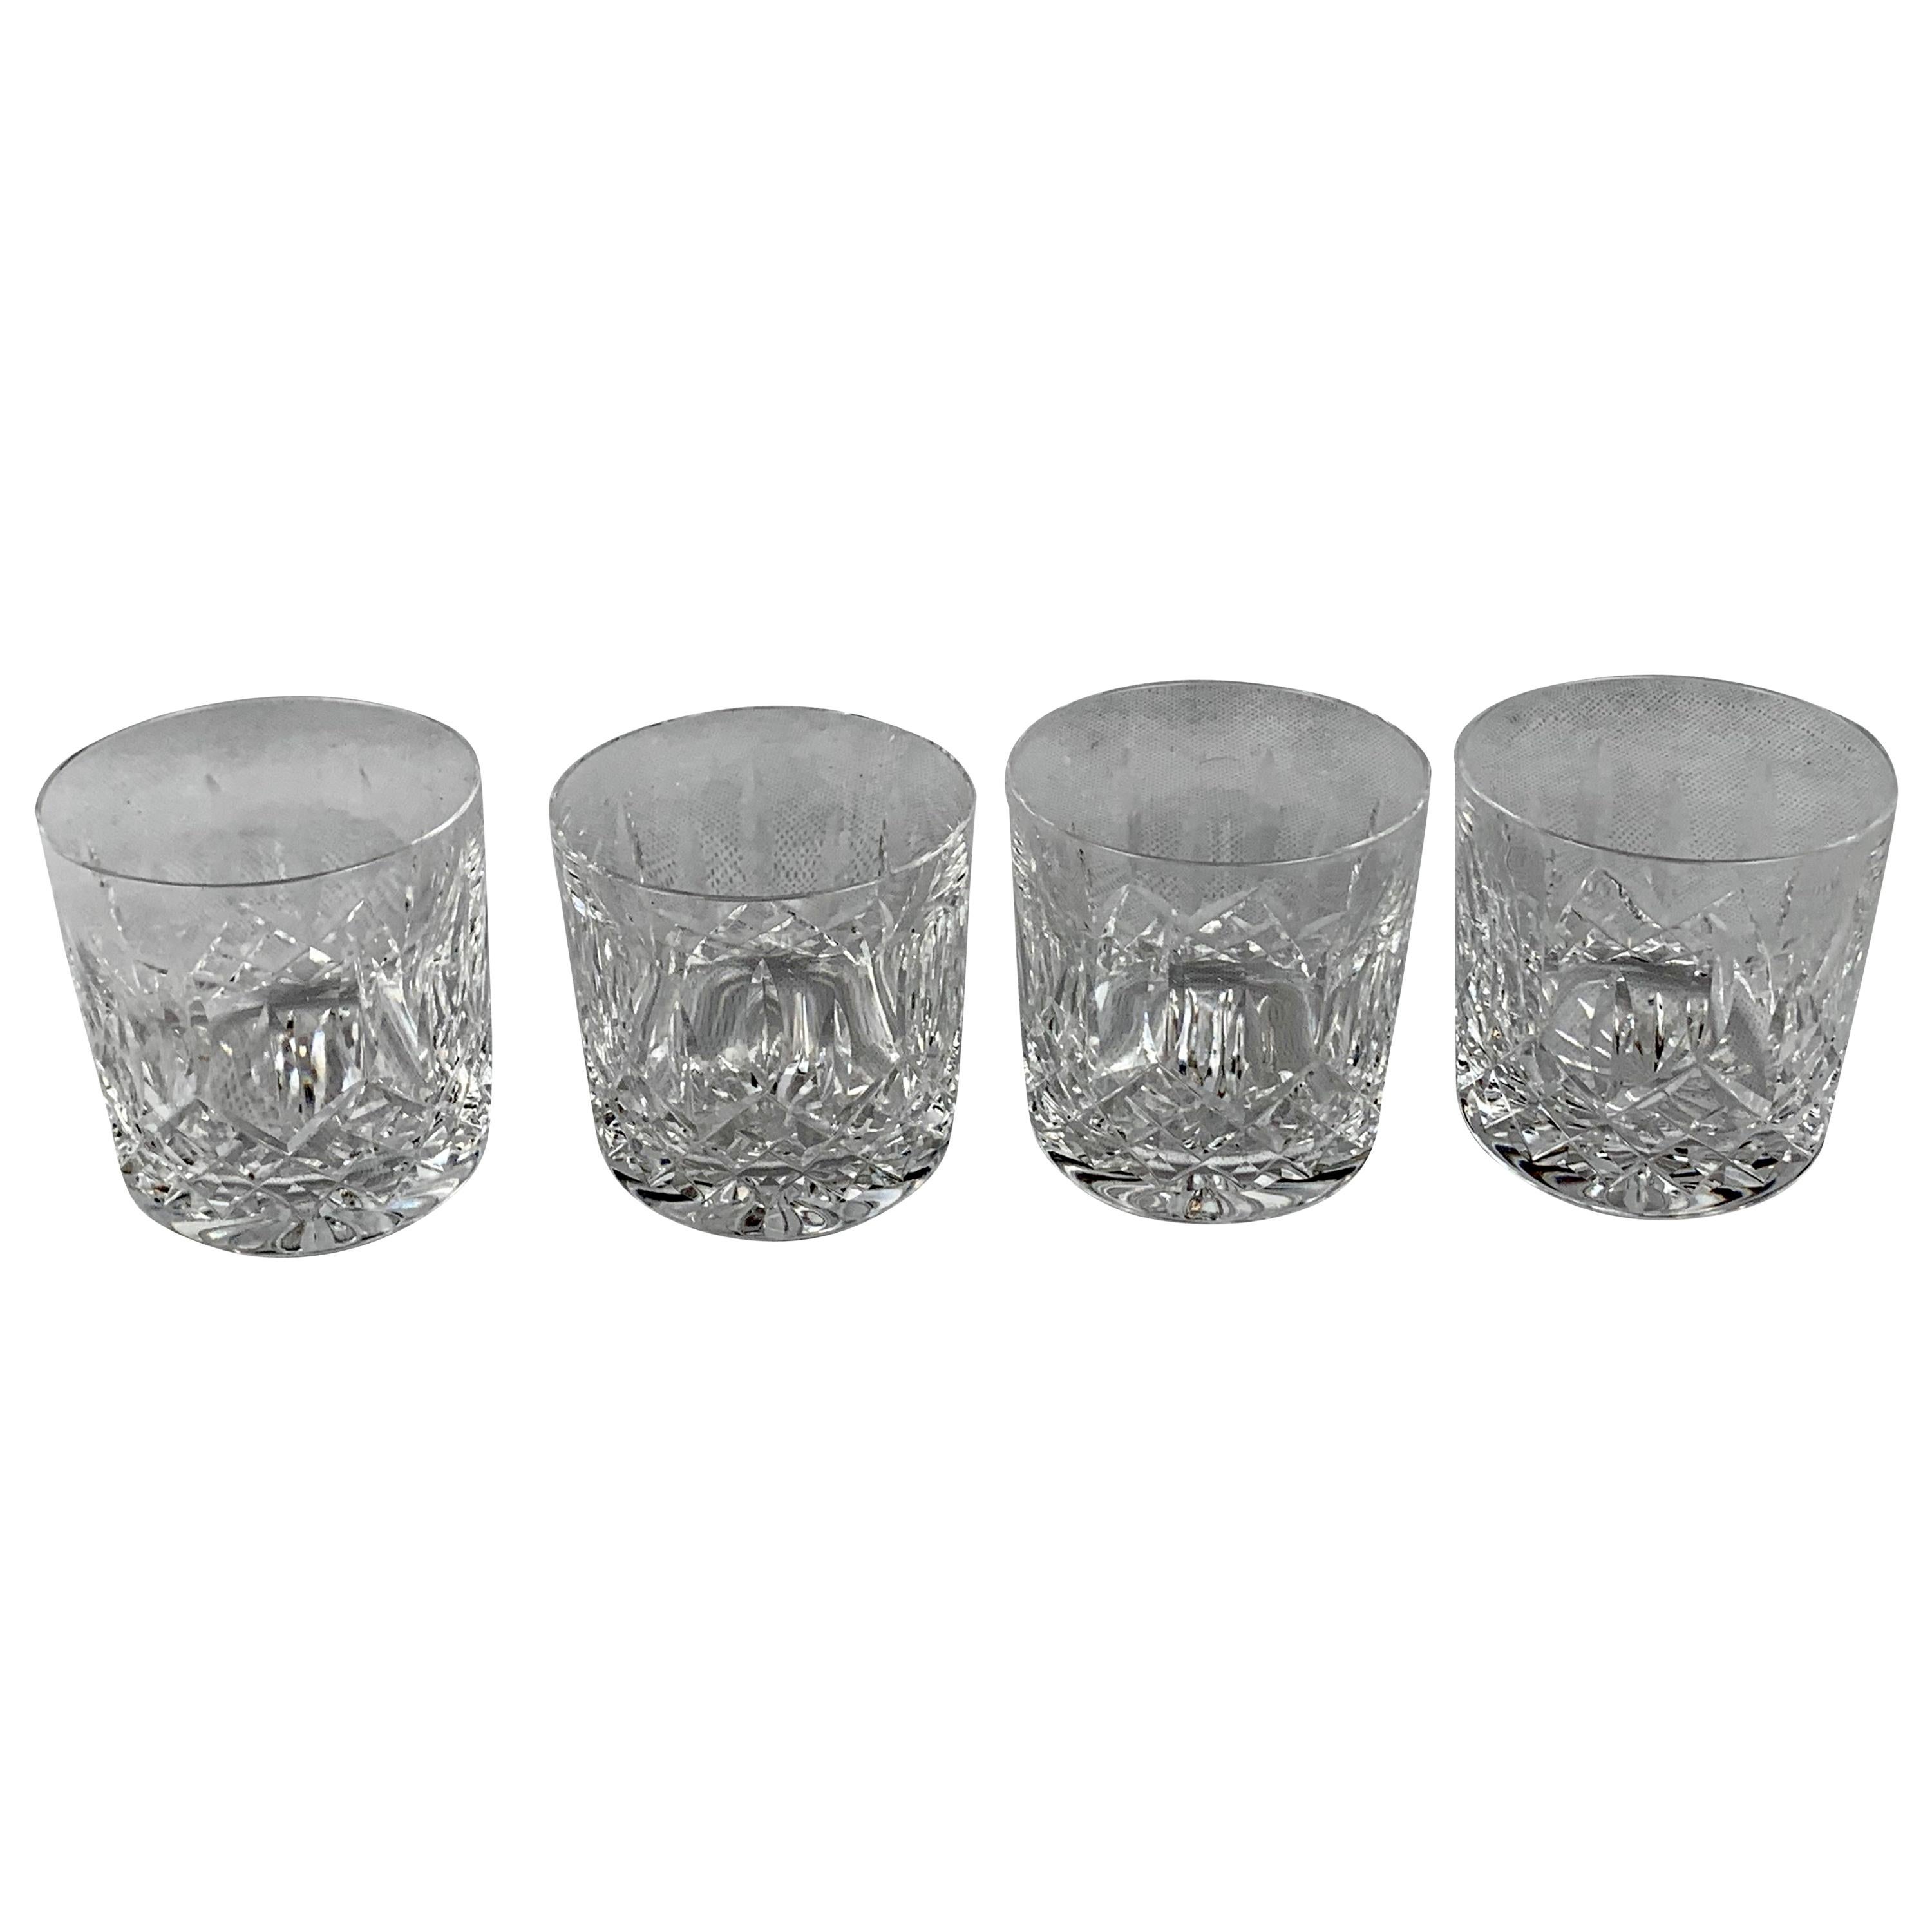 Founded by William and George Penrose, Waterford was established in the heart of the Irish harbor town of Waterford in 1783. These cut crystal old fashioned glasses still carry the spirit of Waterford's cut crystal heritage.  The pattern is Lismore